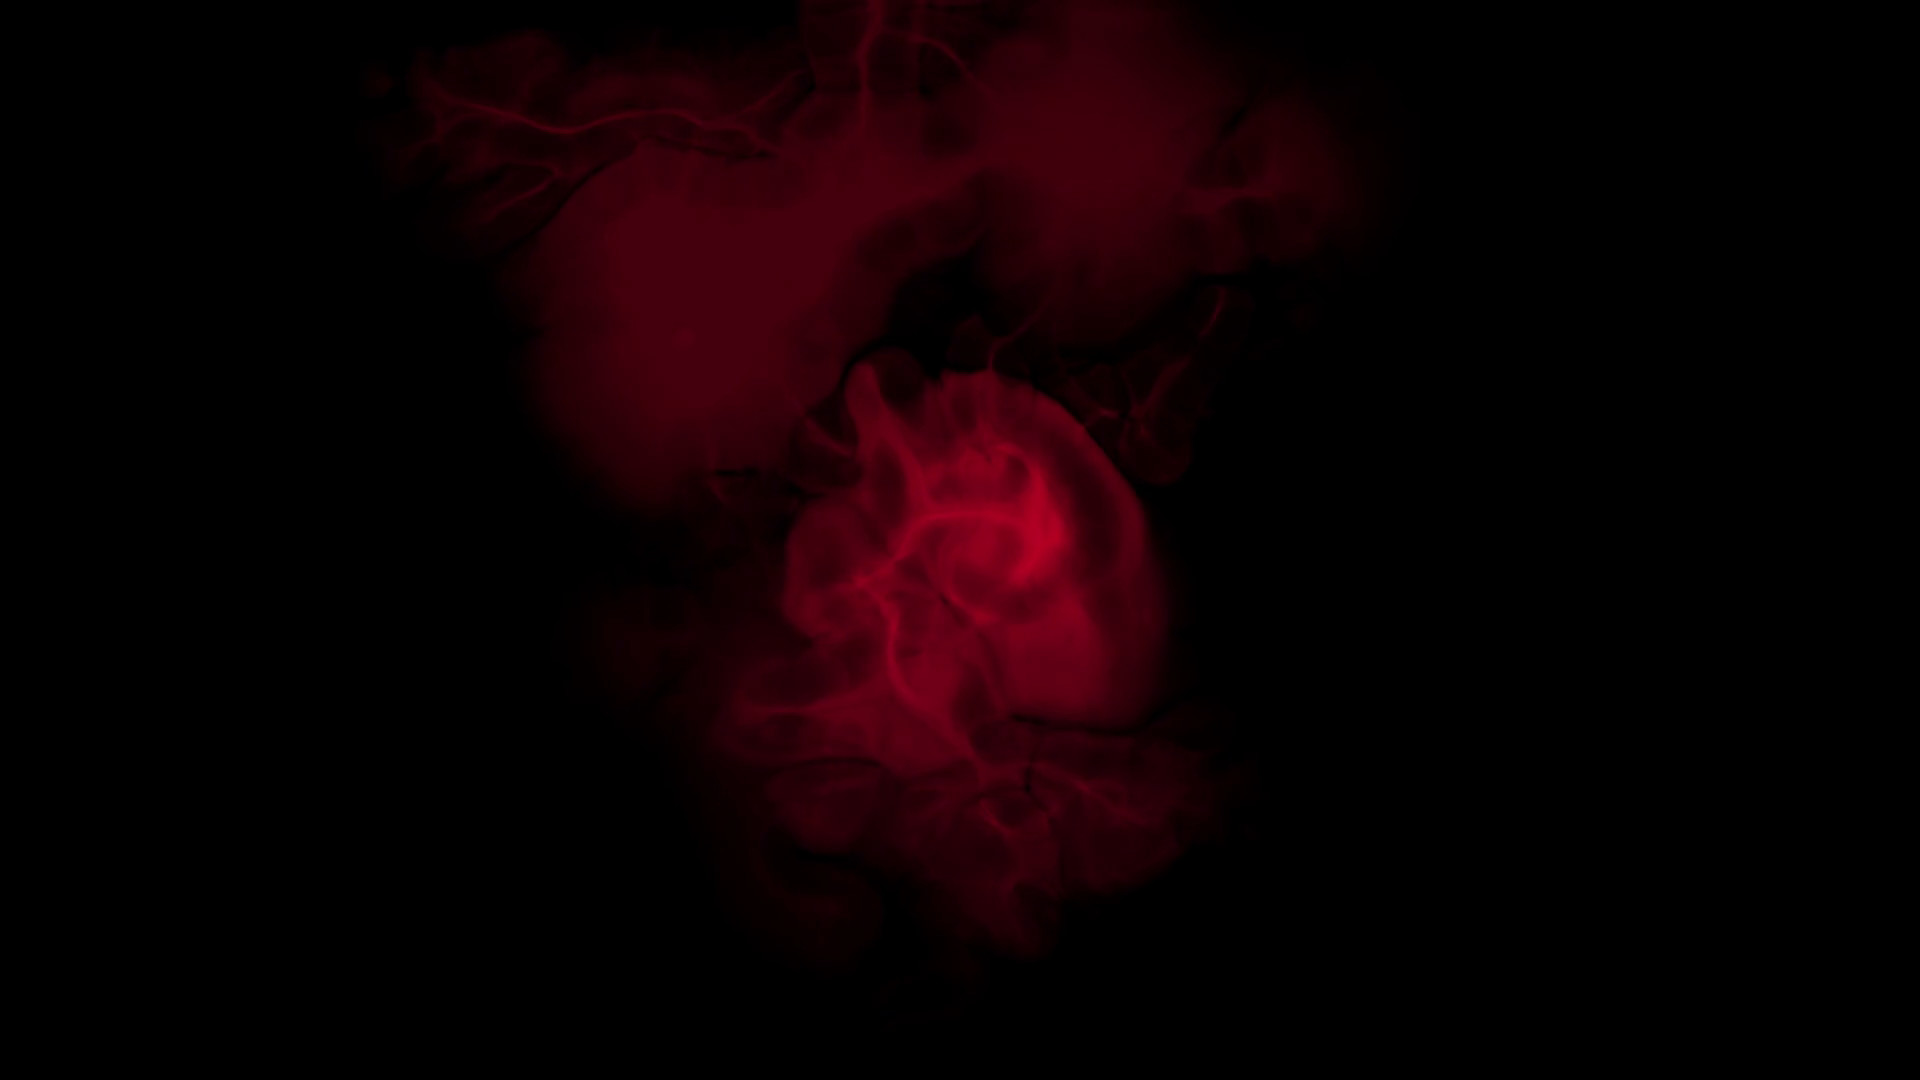 1920x1080 Blood texture animation background Stock Footage. Deep red blood texture in  suspension changing shape over time. Motion Background - VideoBlocks